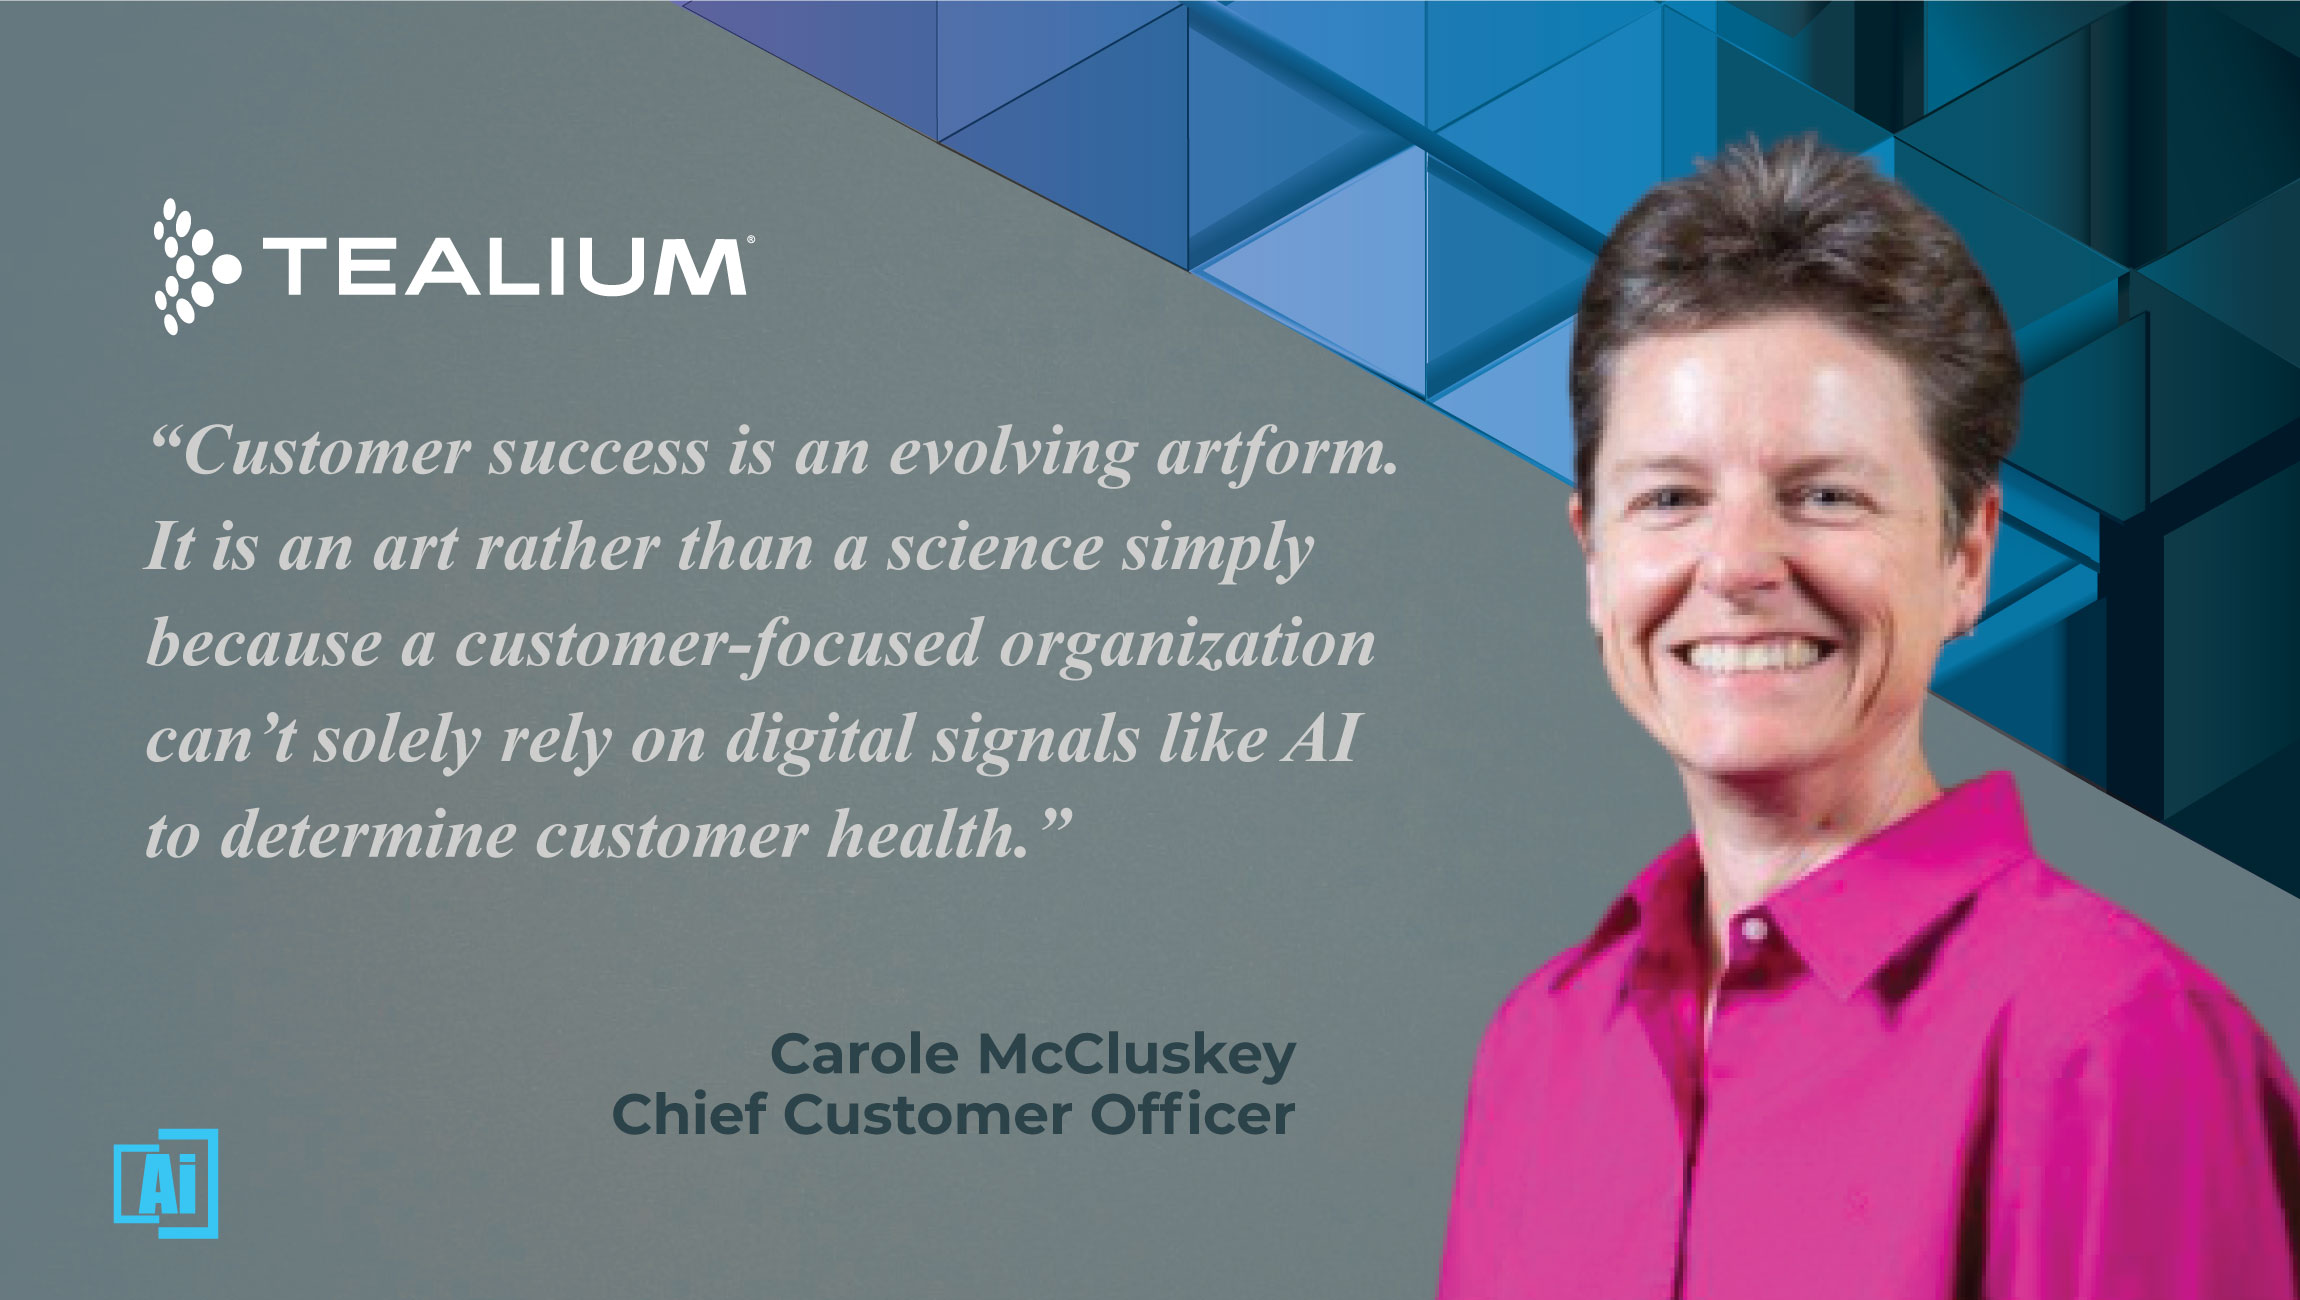 AiThority Interview with Carole McCluskey, Chief Customer Officer at Tealium